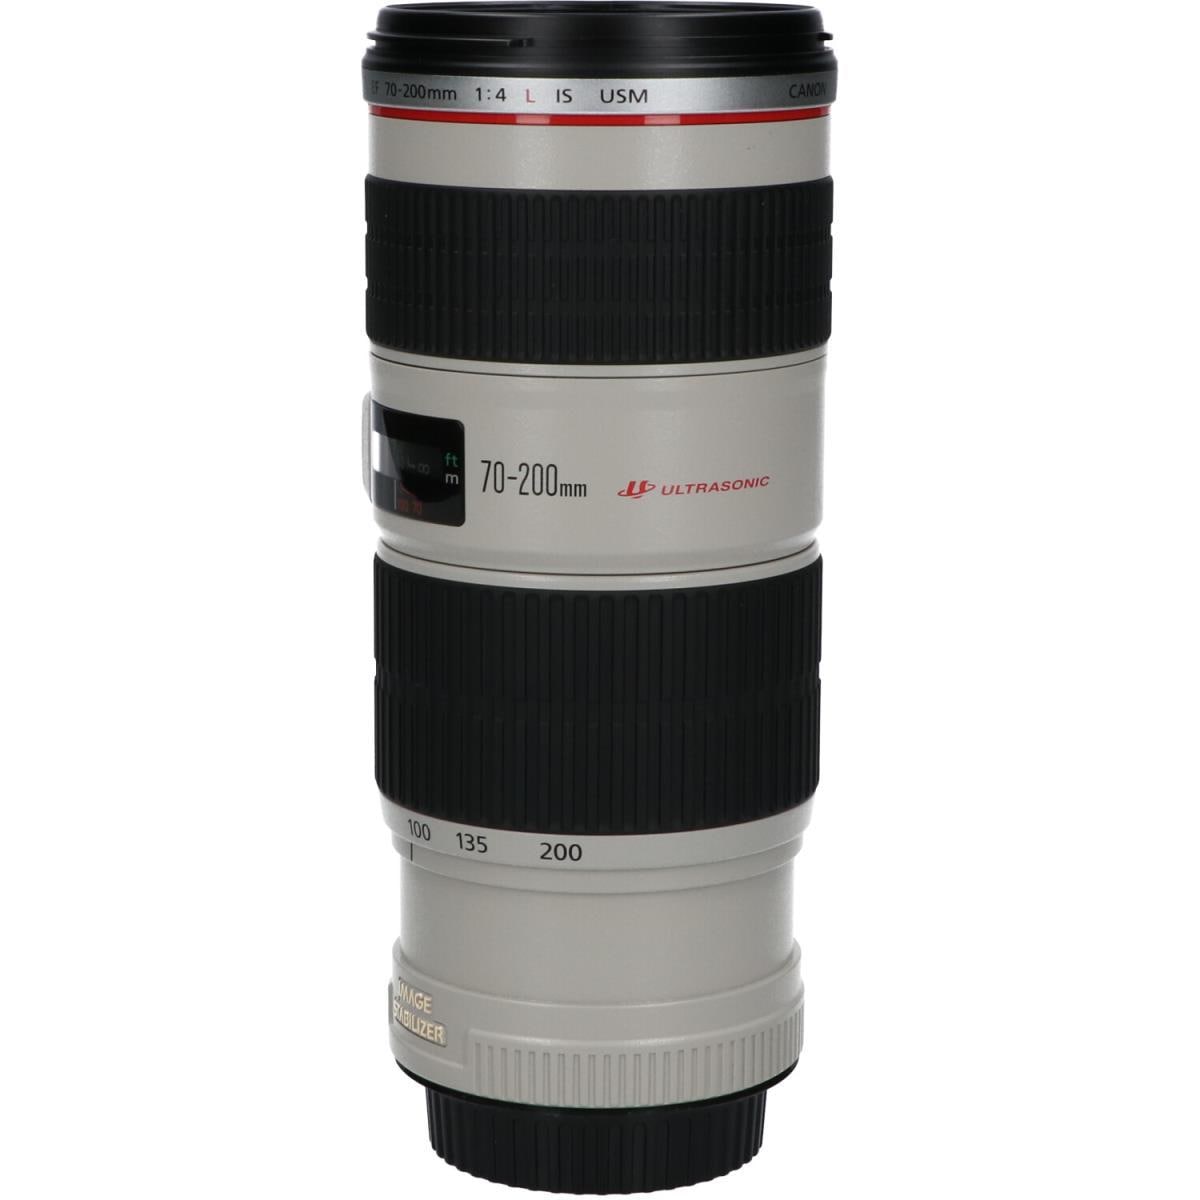 CANON EF70-200mm F4L IS USM